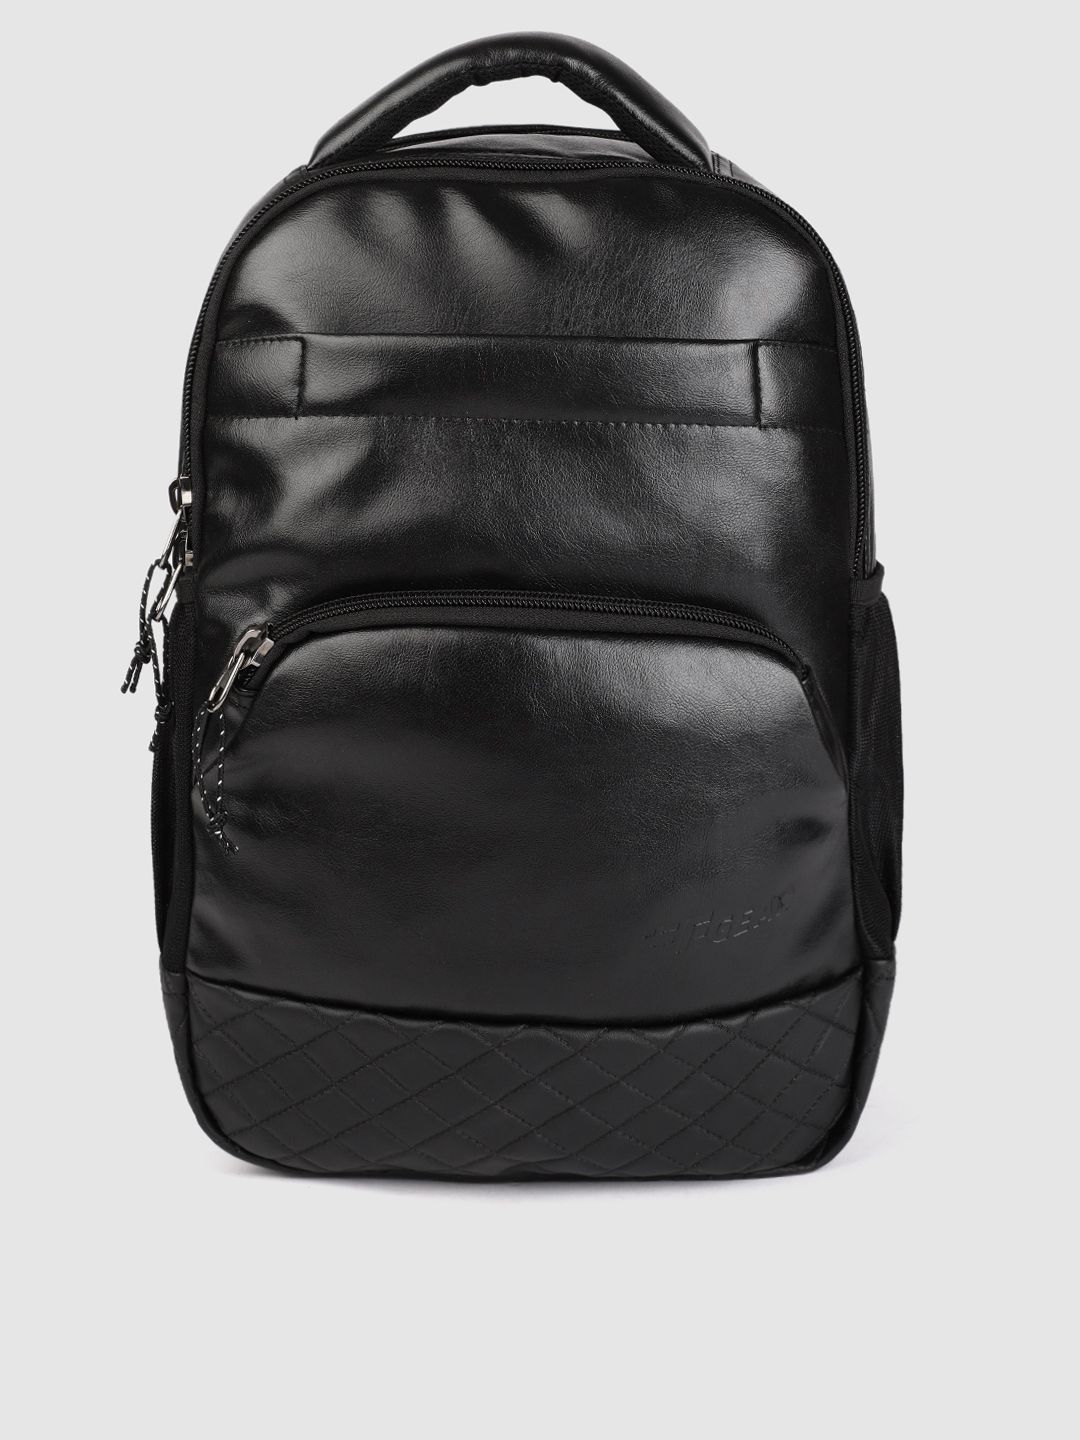 F Gear Unisex Black Solid Luxur Backpack Price in India